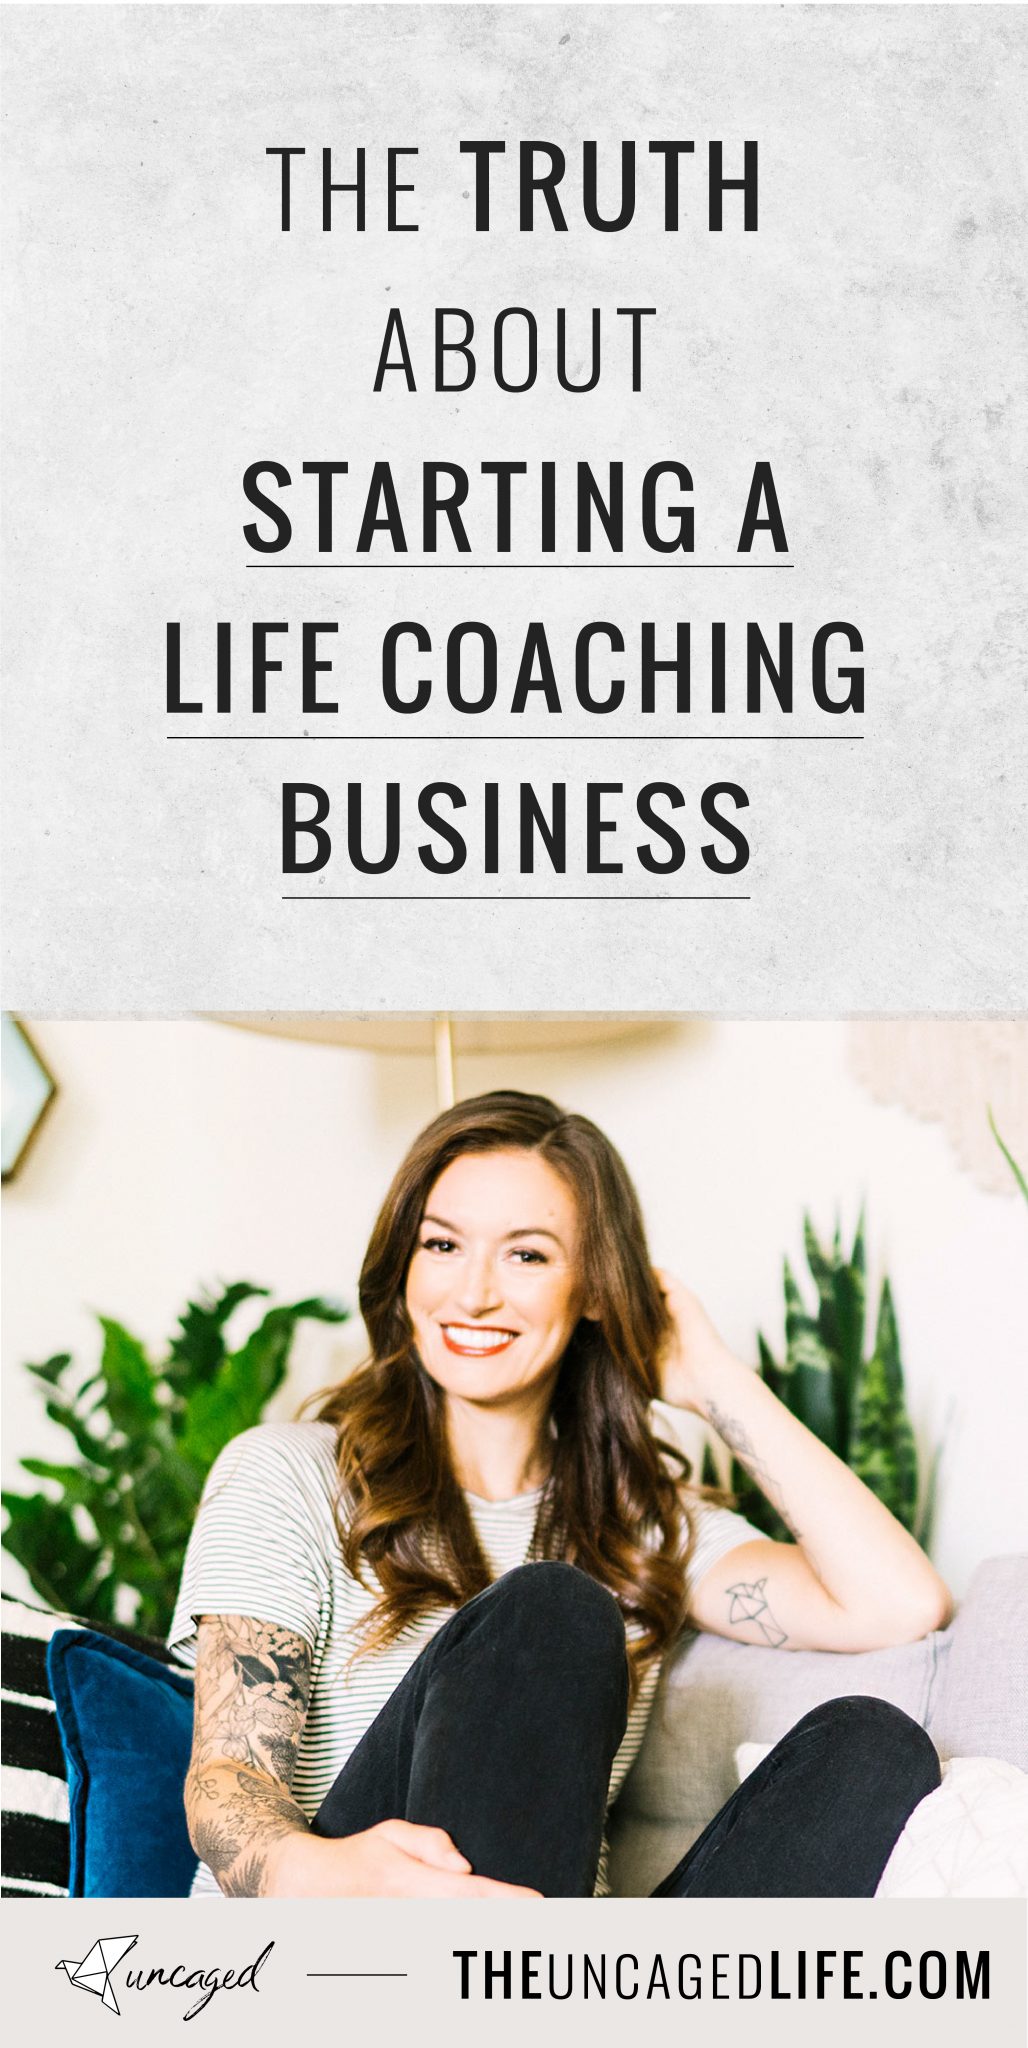 What they don't tell you about starting a life coaching business